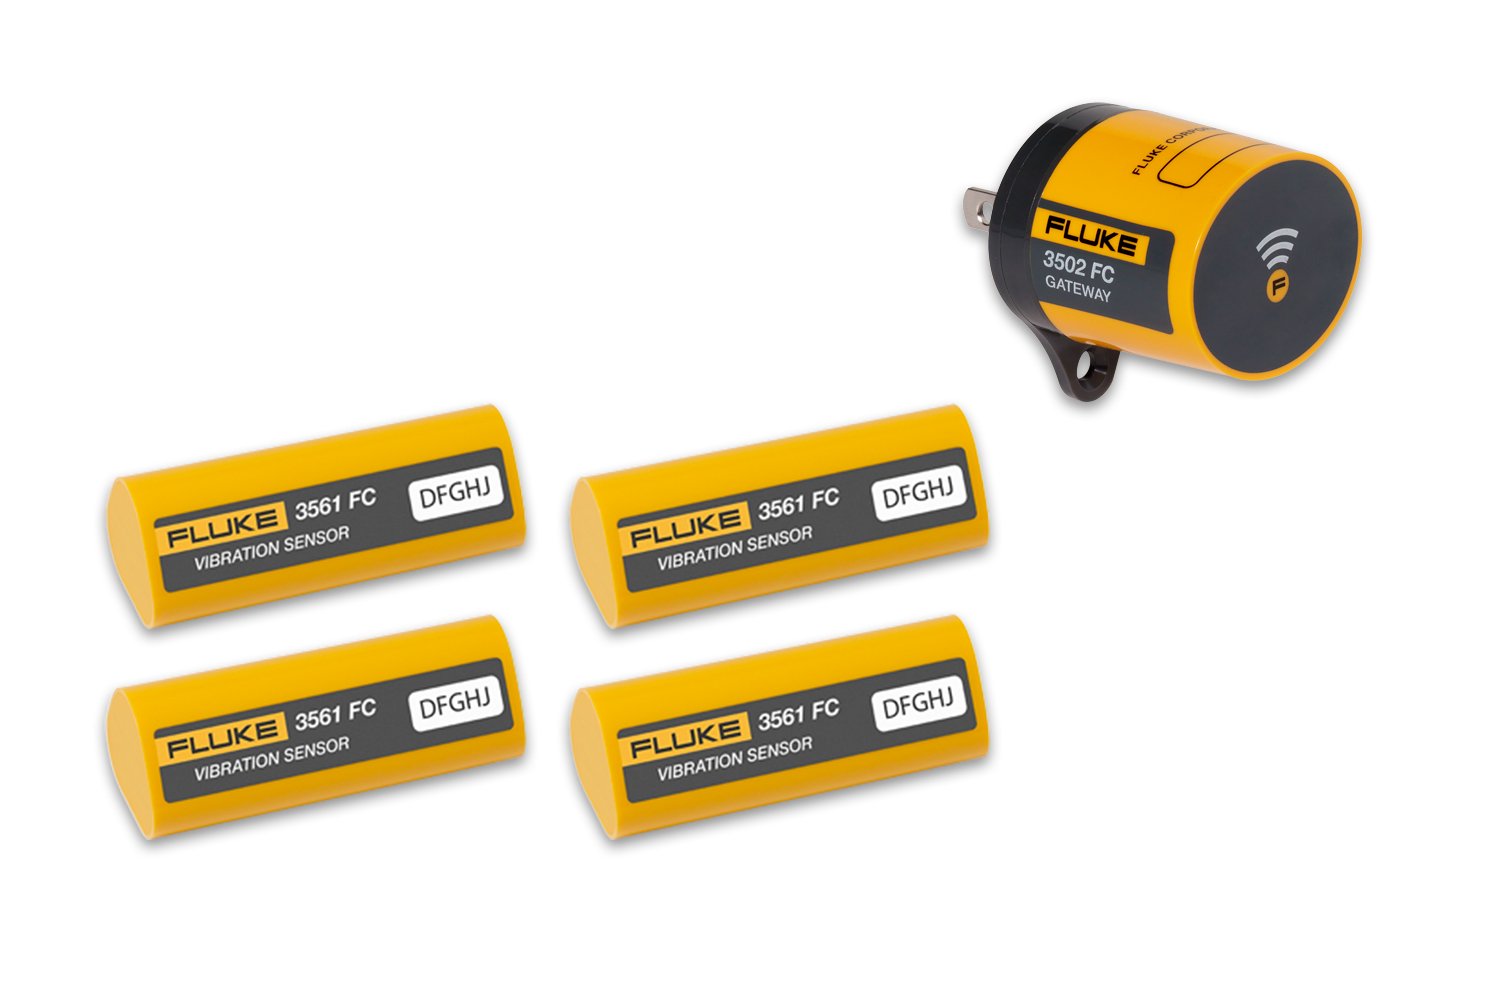 A clickable image of a pack of Fluke 3561 FC Vibration Sensors. Leads to the product page.